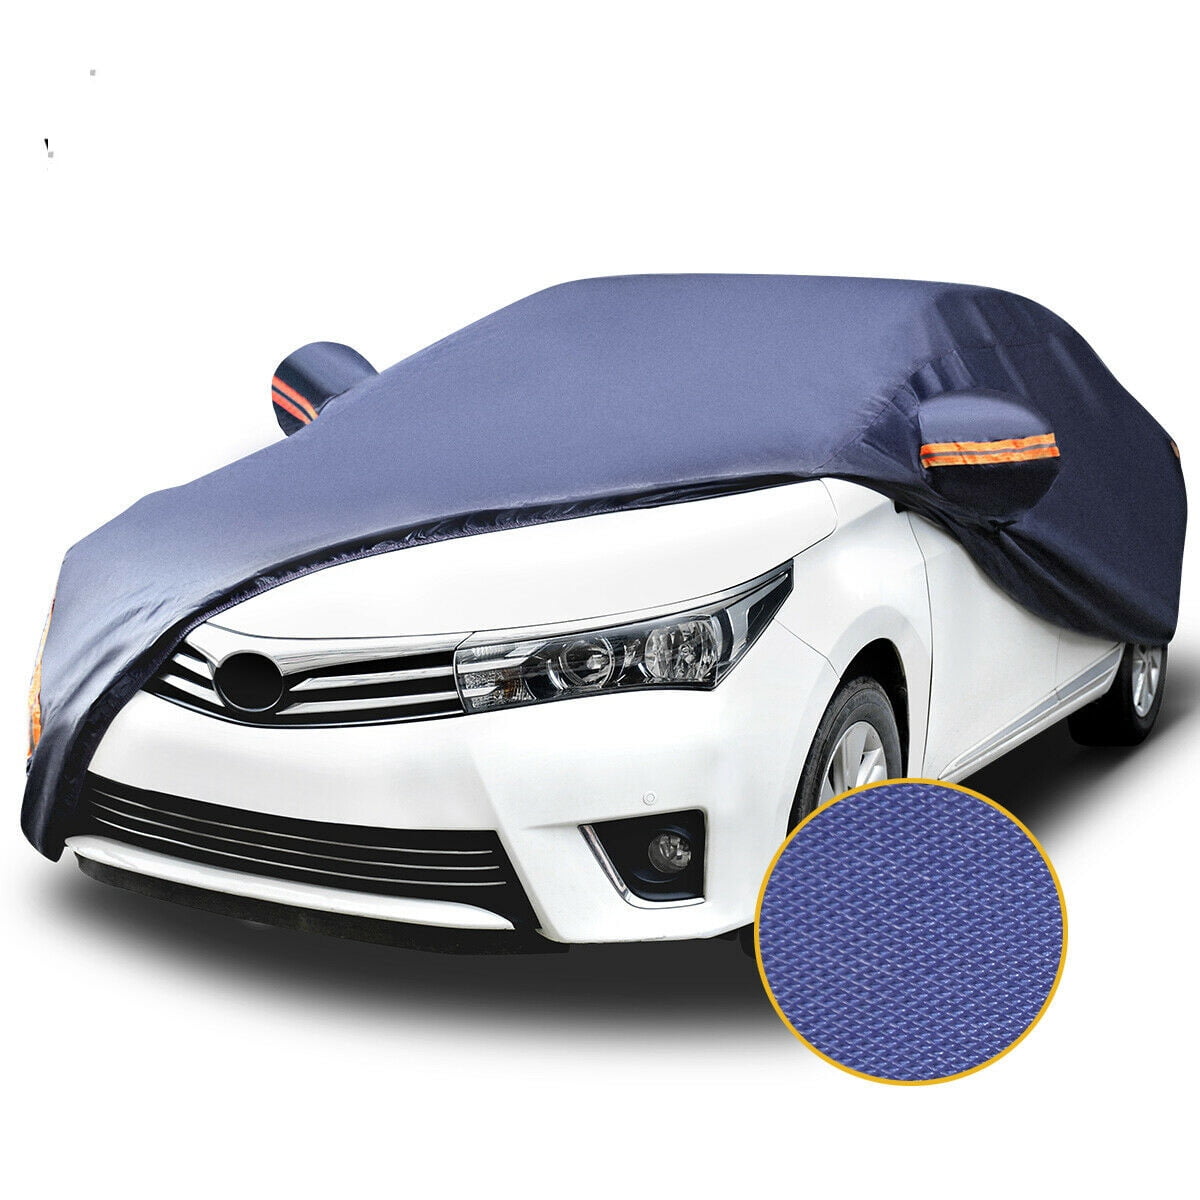 TOYOTA GT86 New Fully Breathable Water Resistant Car Cover